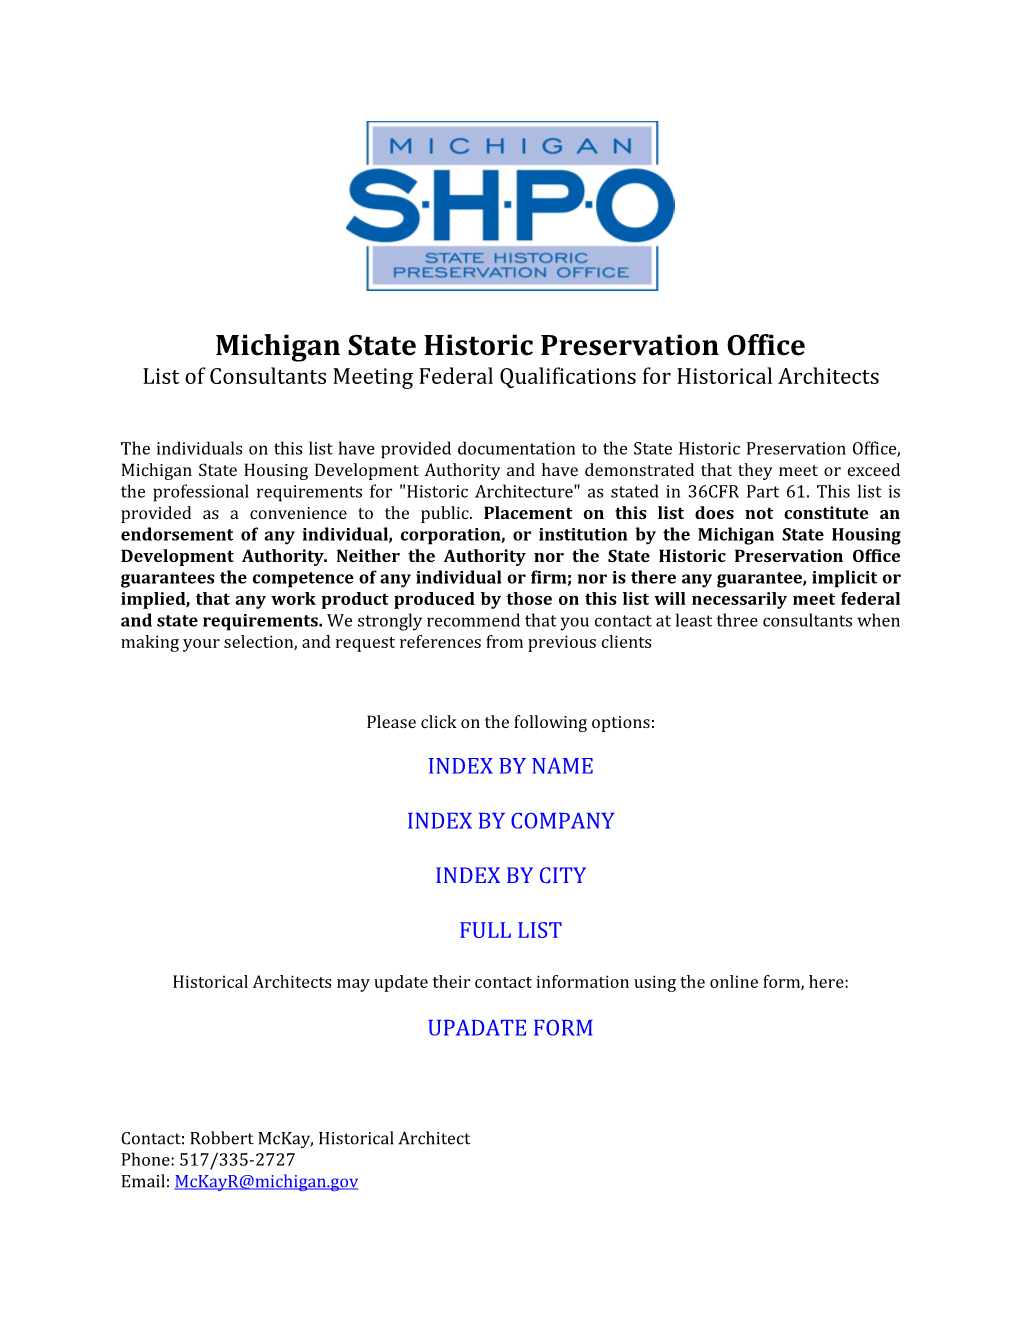 Michigan State Historic Preservation Office List of Consultants Meeting Federal Qualifications for Historical Architects